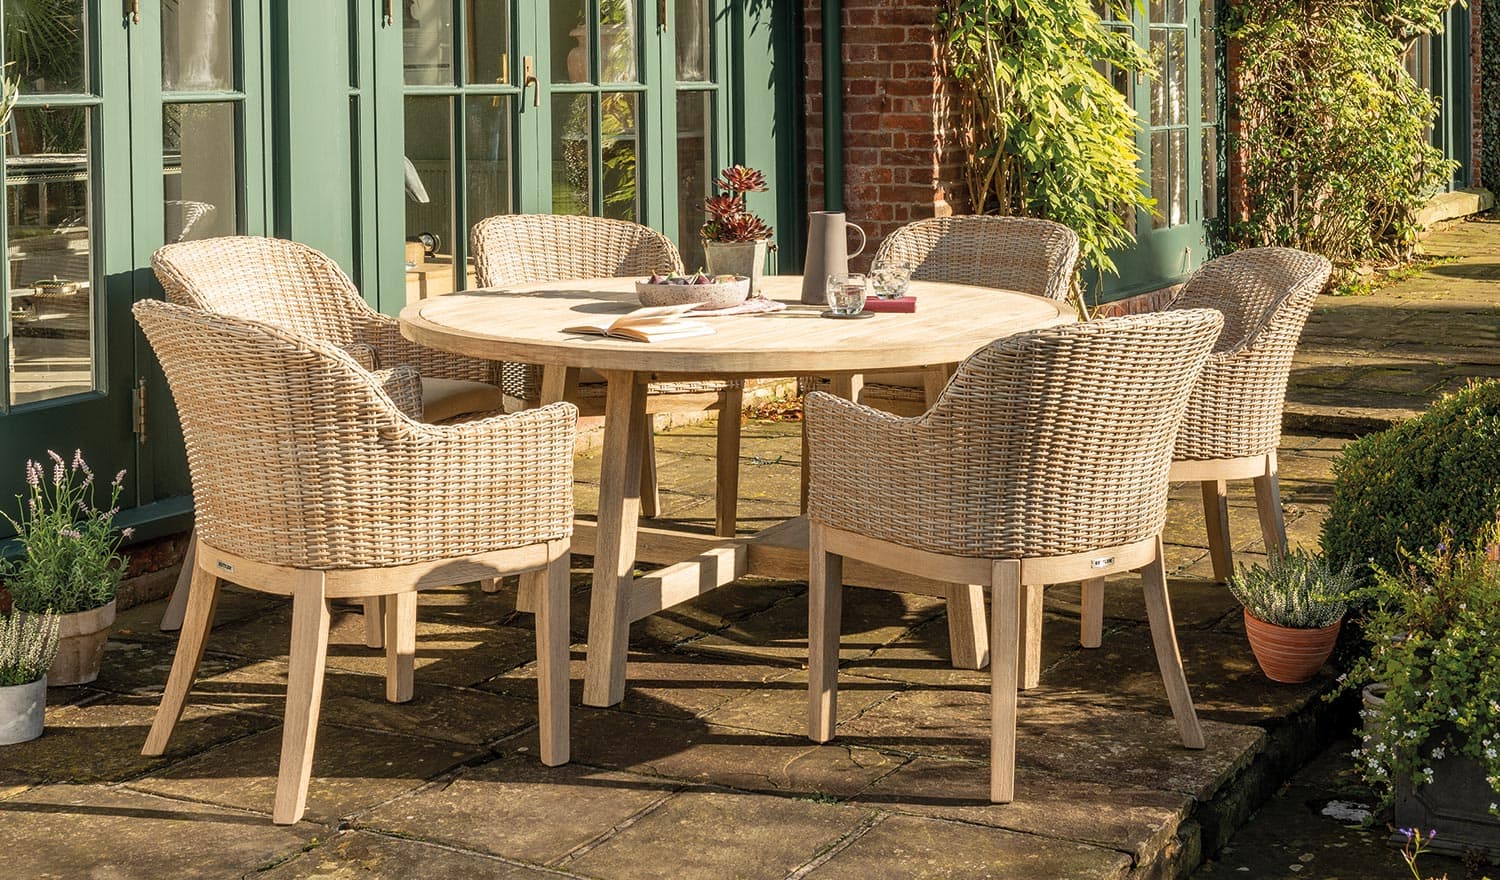 Cora 150cm Round Dining Table 6 Seater, 6 Seater Round Dining Table And Chairs Uk